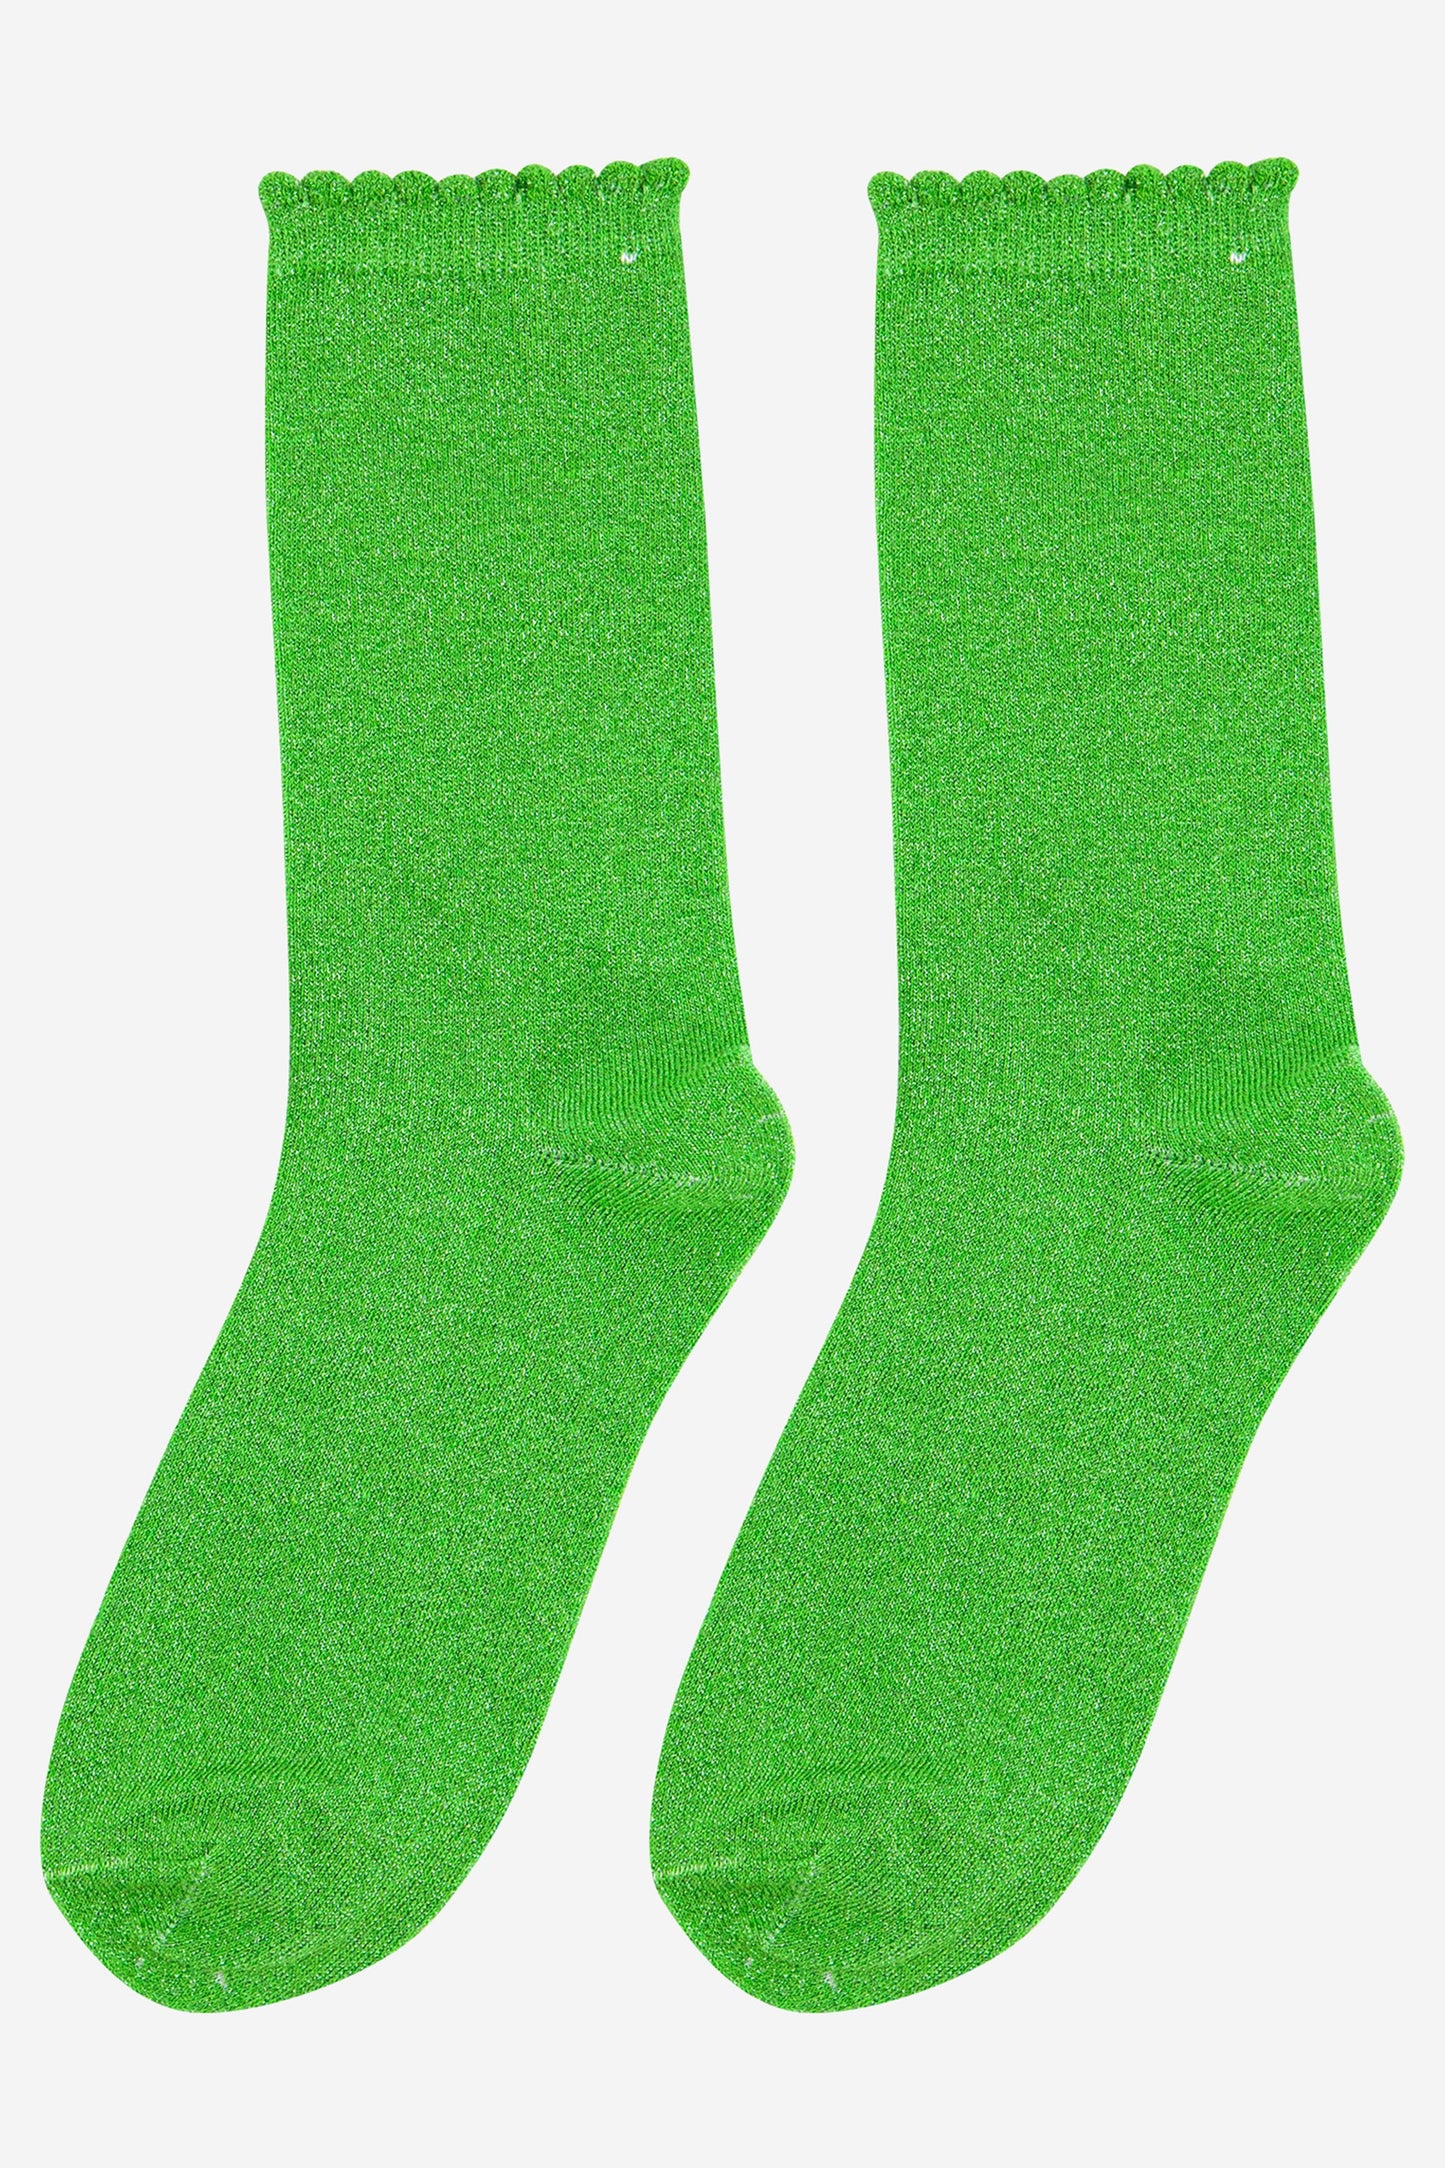 green sparkly glitter socks with scalloped cuffs and an all over shimmer